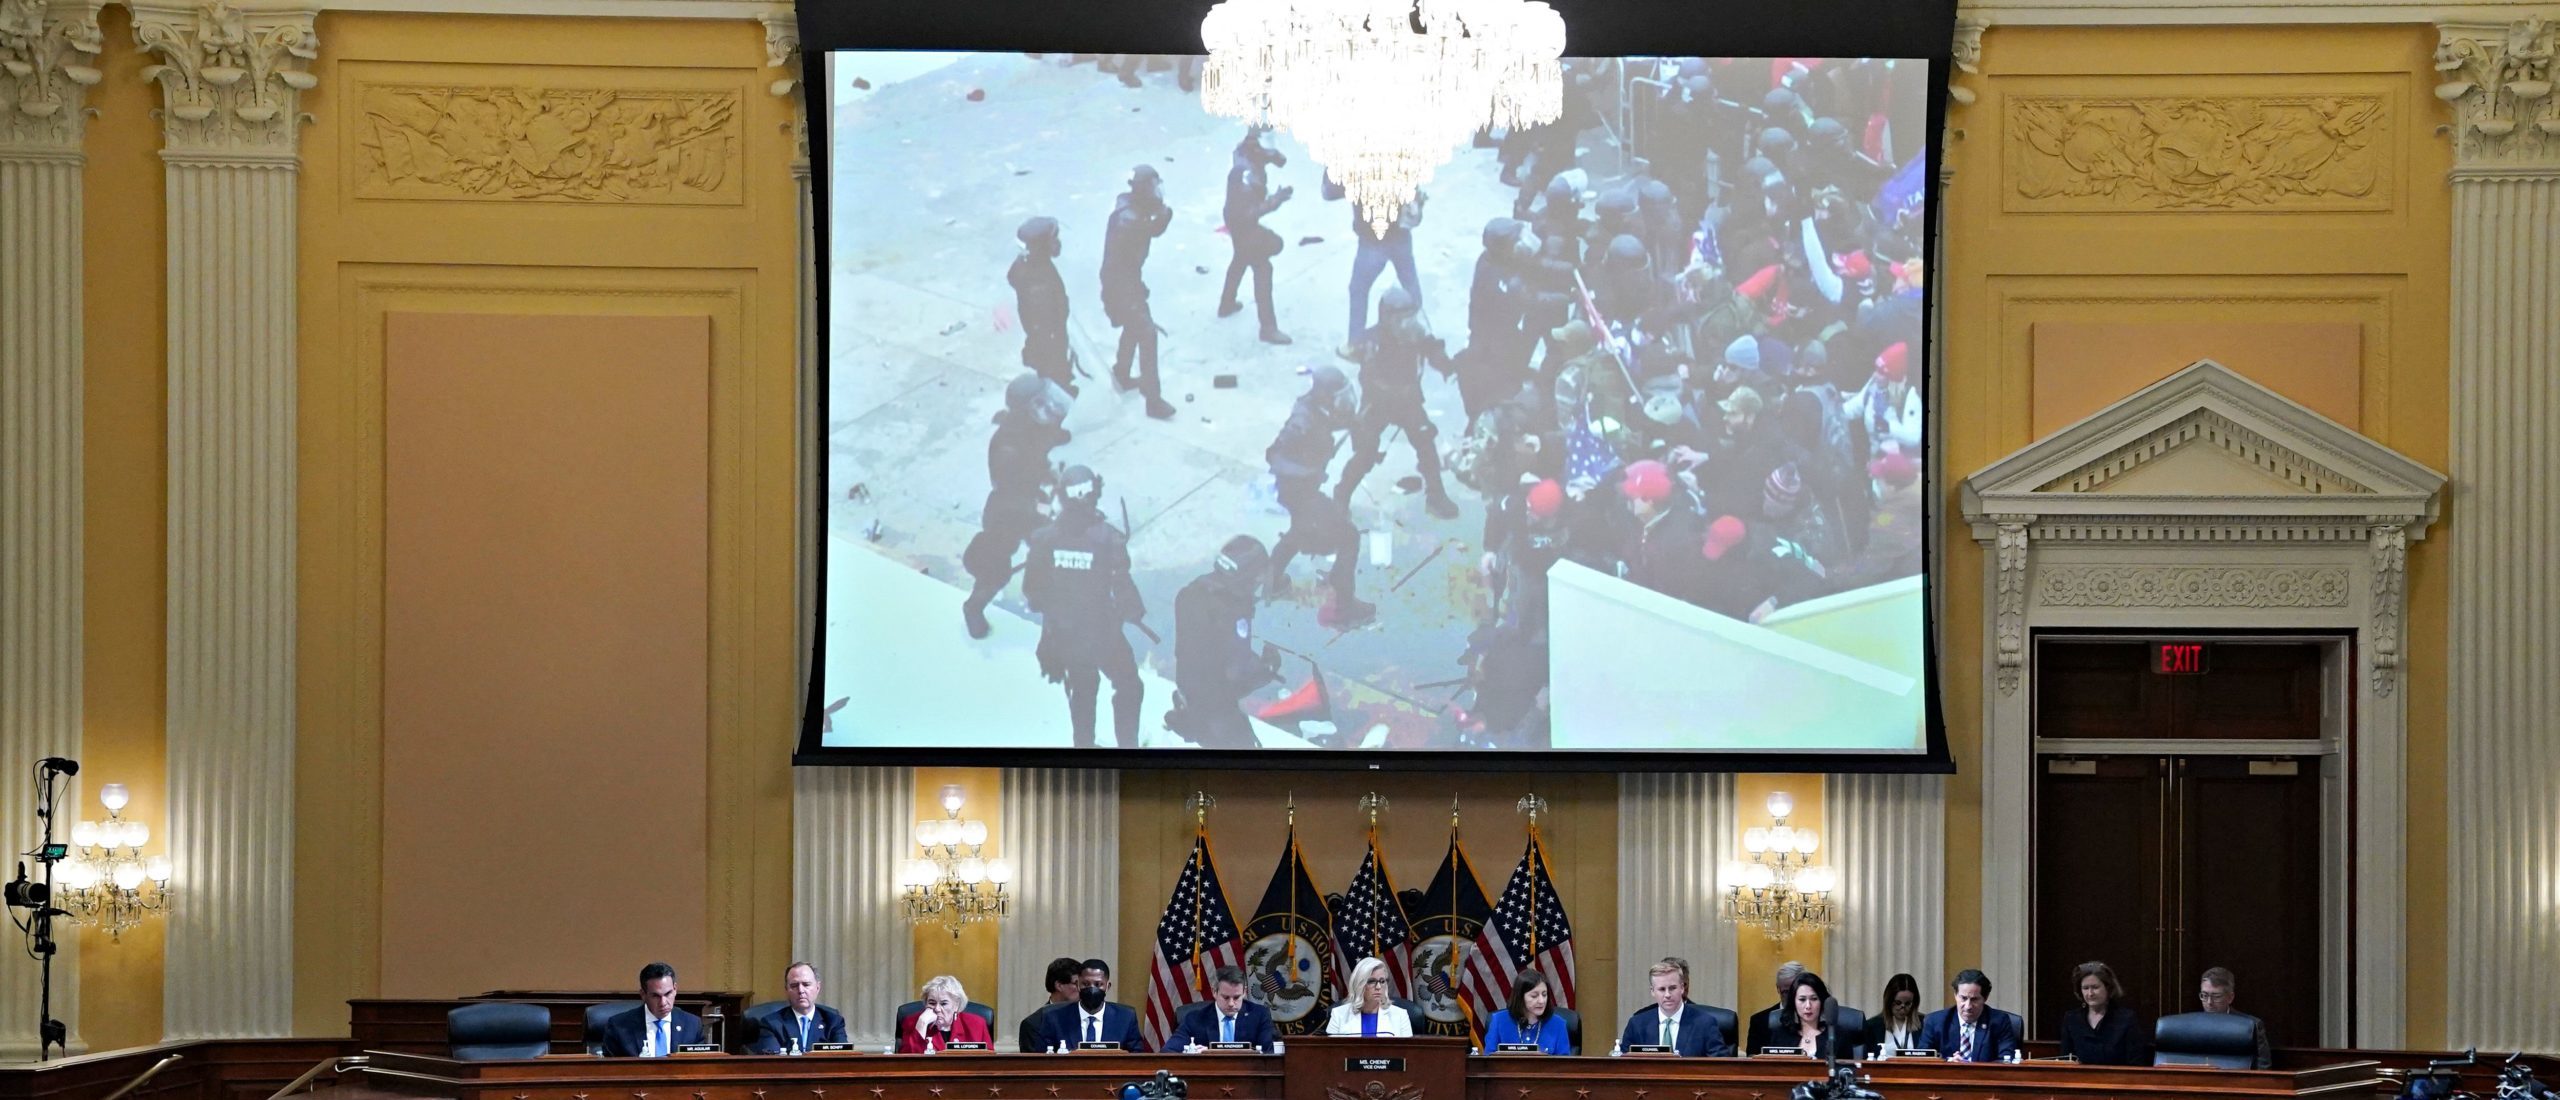 A video of Jan. 6 rioters outside the US Capitol is displayed on a screen during a hearing by the House Select Committee to investigate the January 6th attack on the US Capitol in the Cannon House Office Building in Washington, DC, on July 21, 2022.